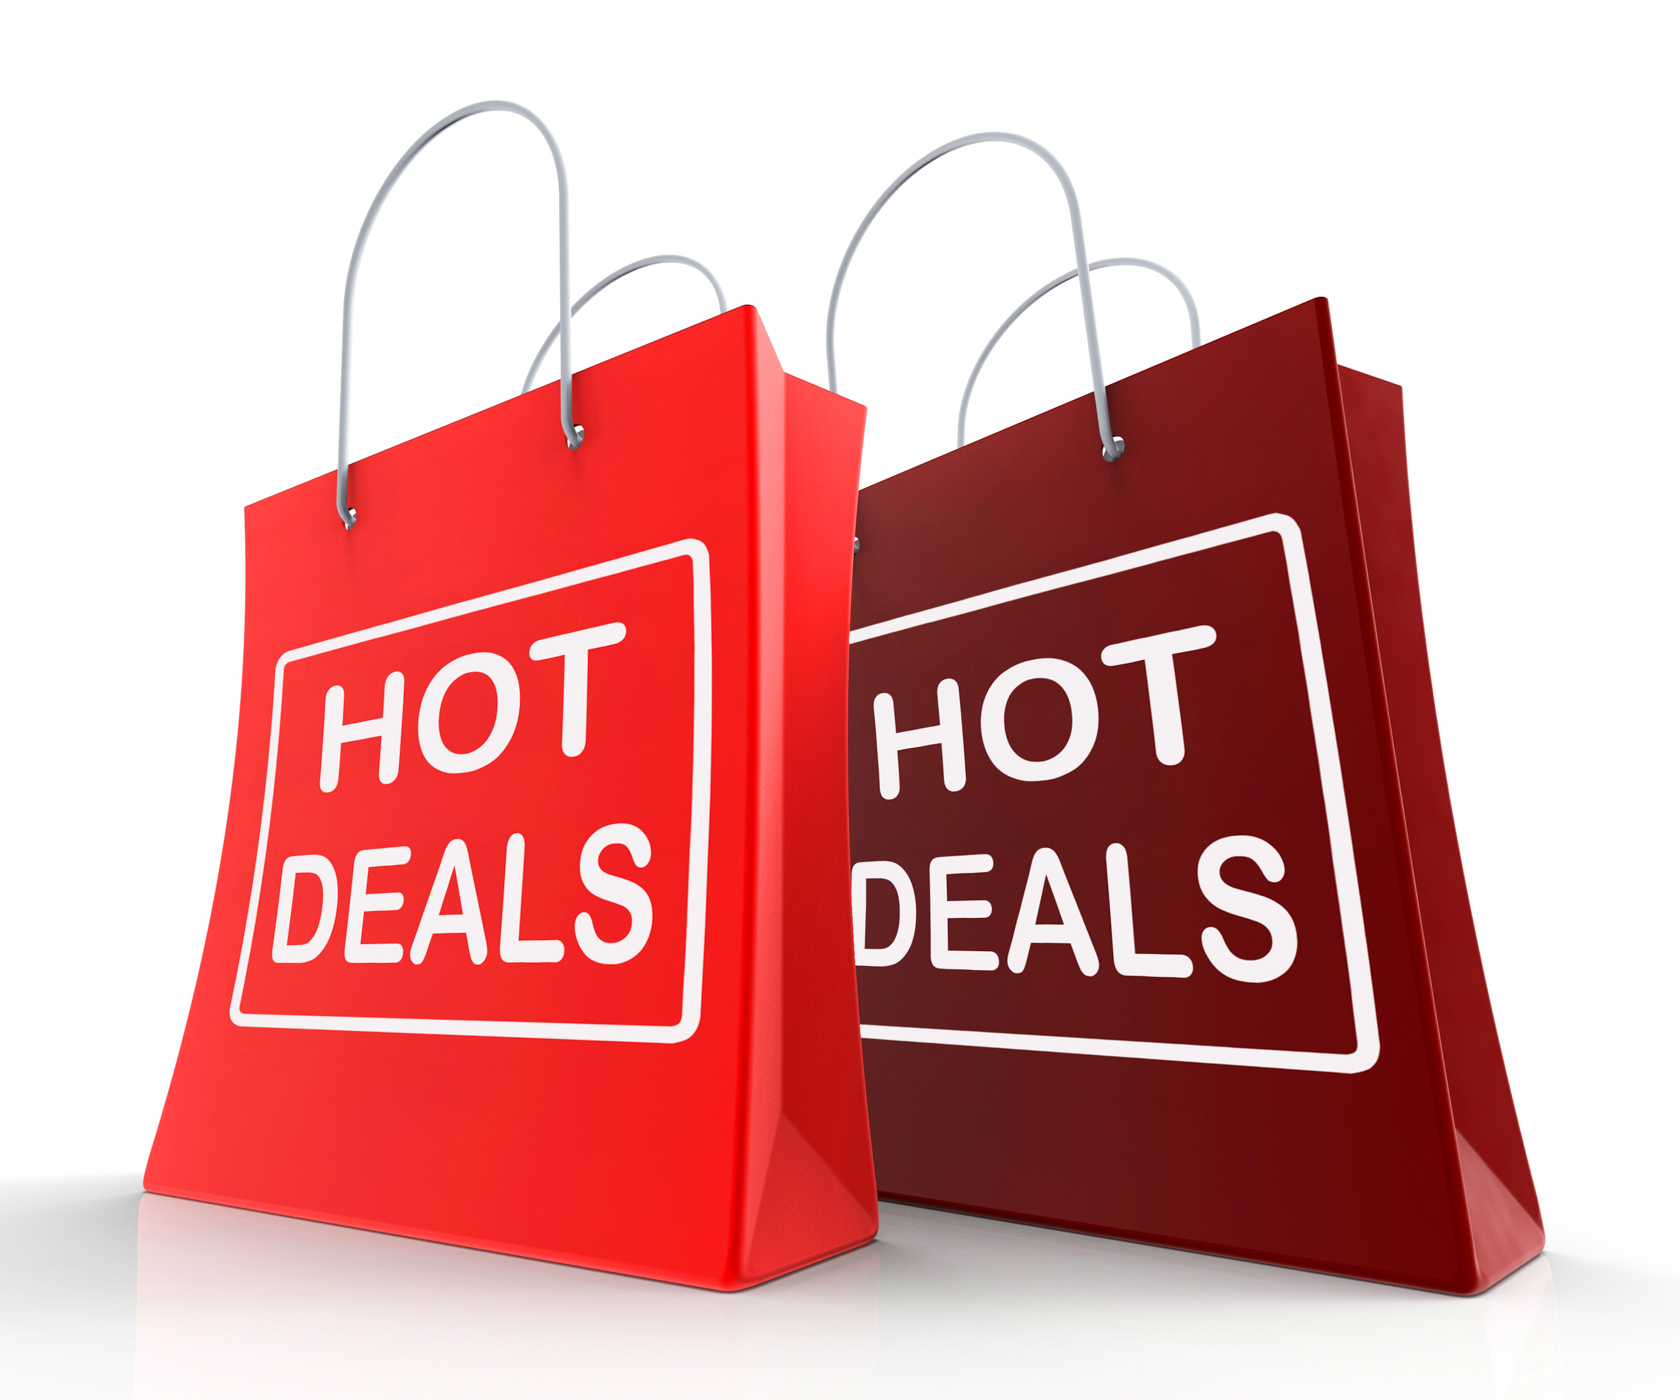 Hot Deals Bags Show Shopping  Discounts and Bargains, Discount, Reduction, Reduced, Promotion, HQ Photo